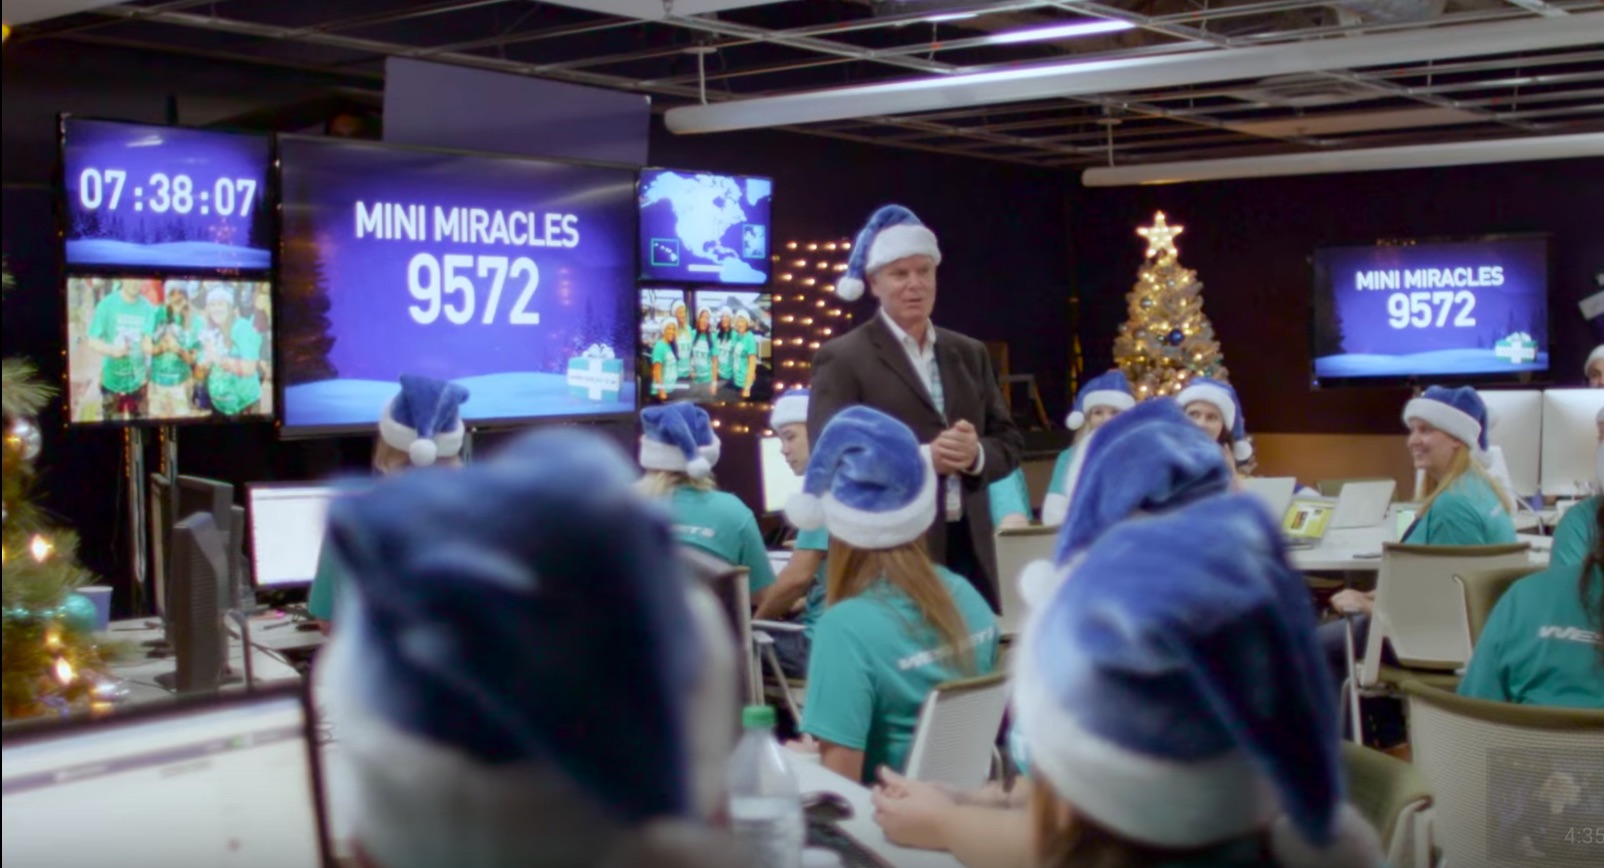 Westjet outdid themselves this year by completing 12,000 'miracles' for people all across their route network.